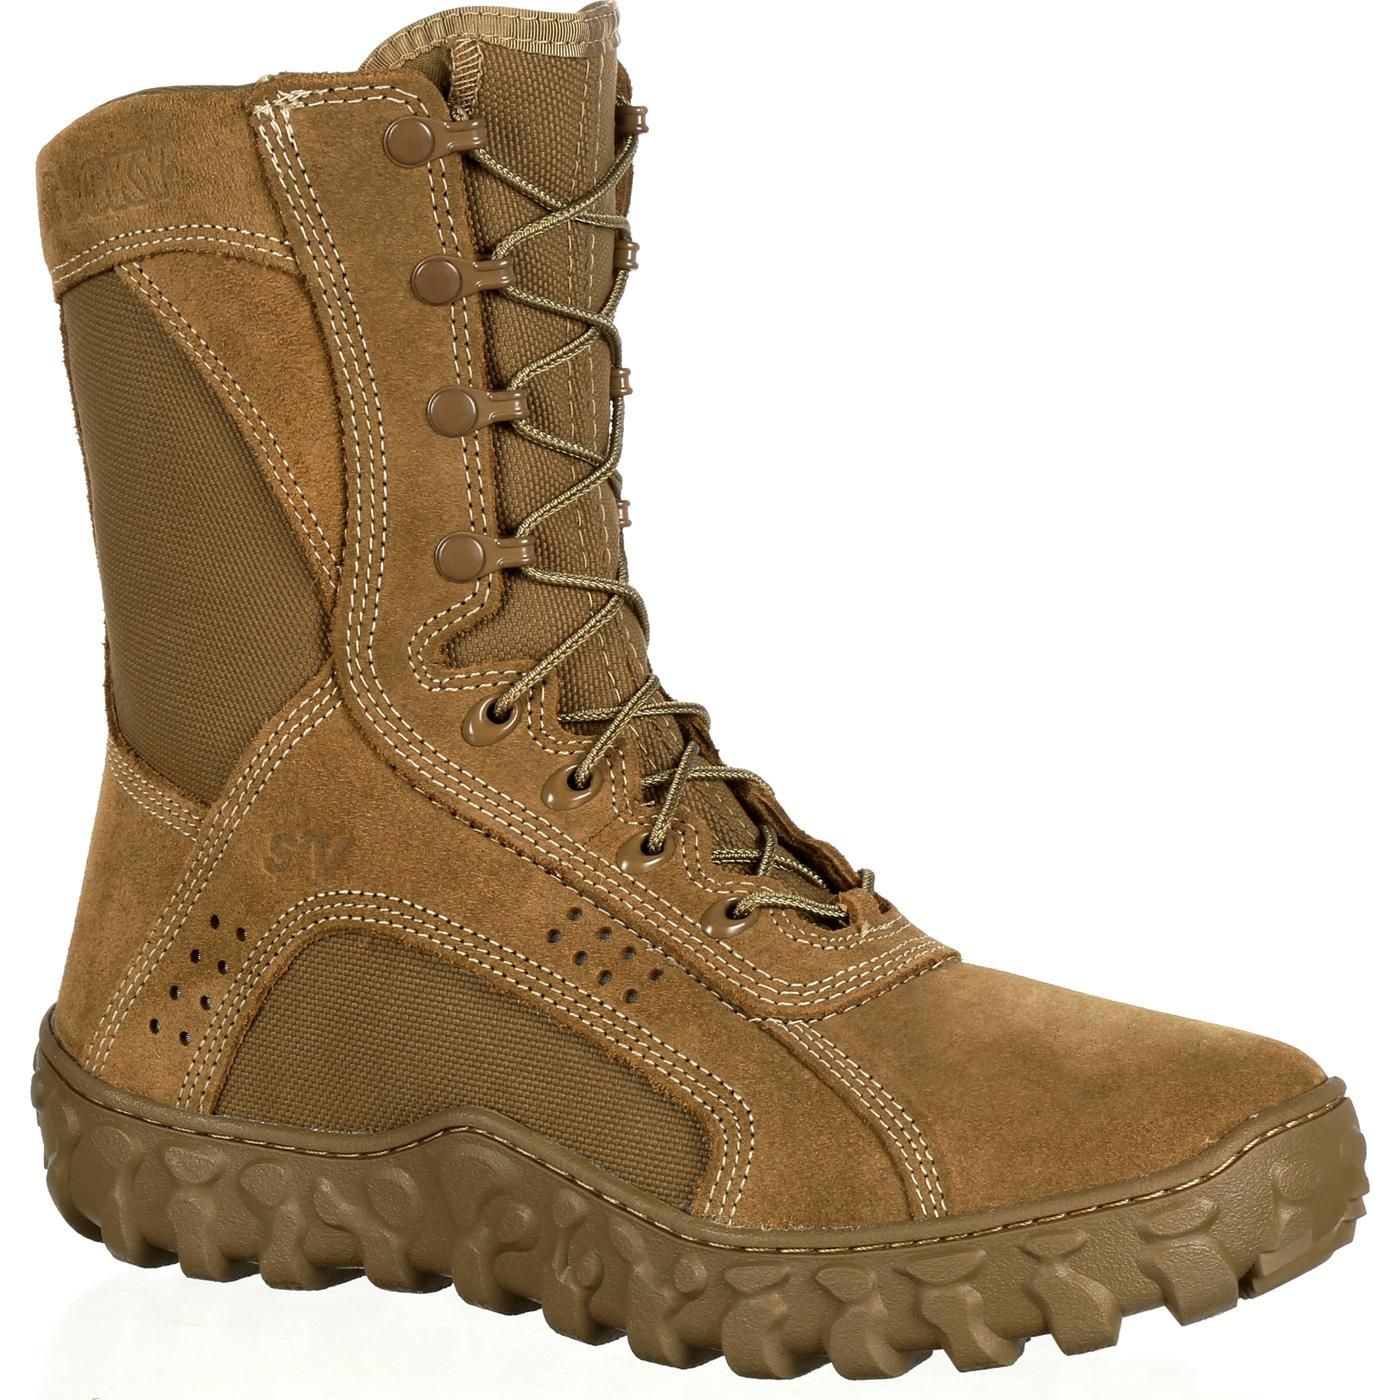 Rocky S2V Tactical Military Boots for Men - Coyote Brown - 10.5M